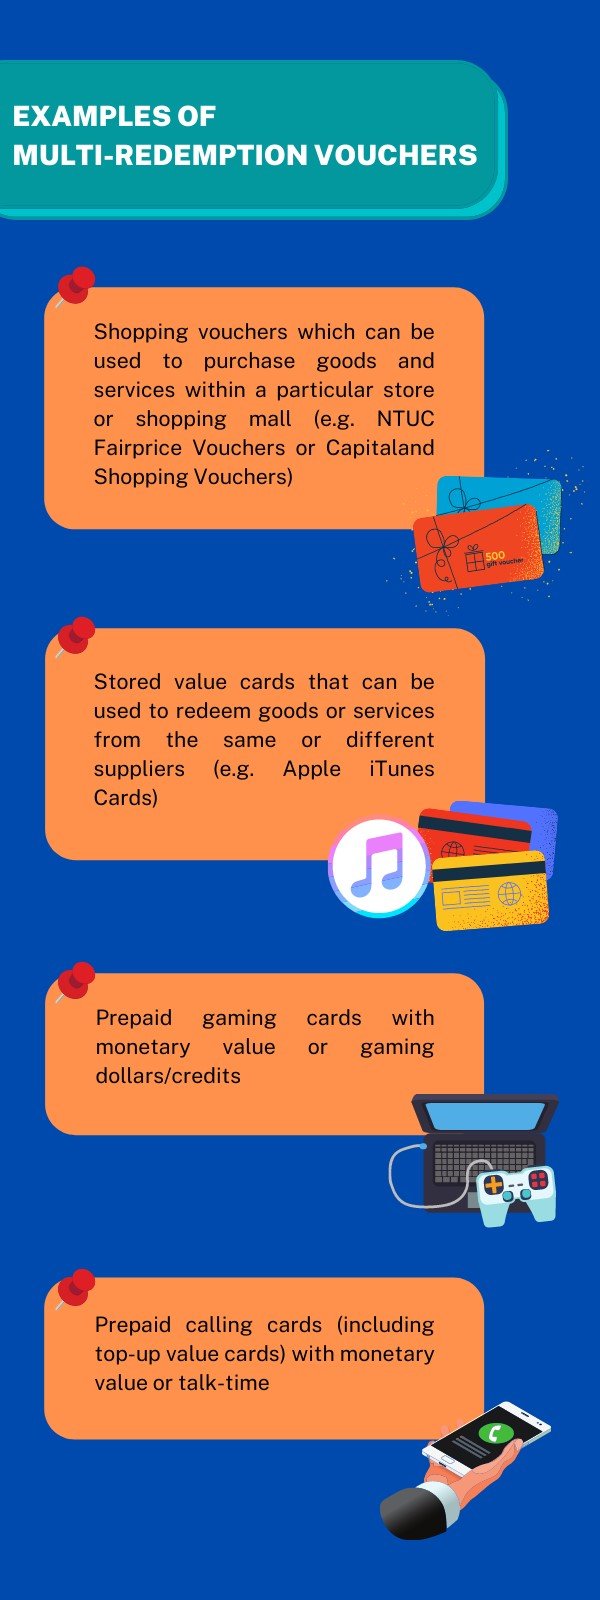 This infographic provides examples of multi-redemption vouchers